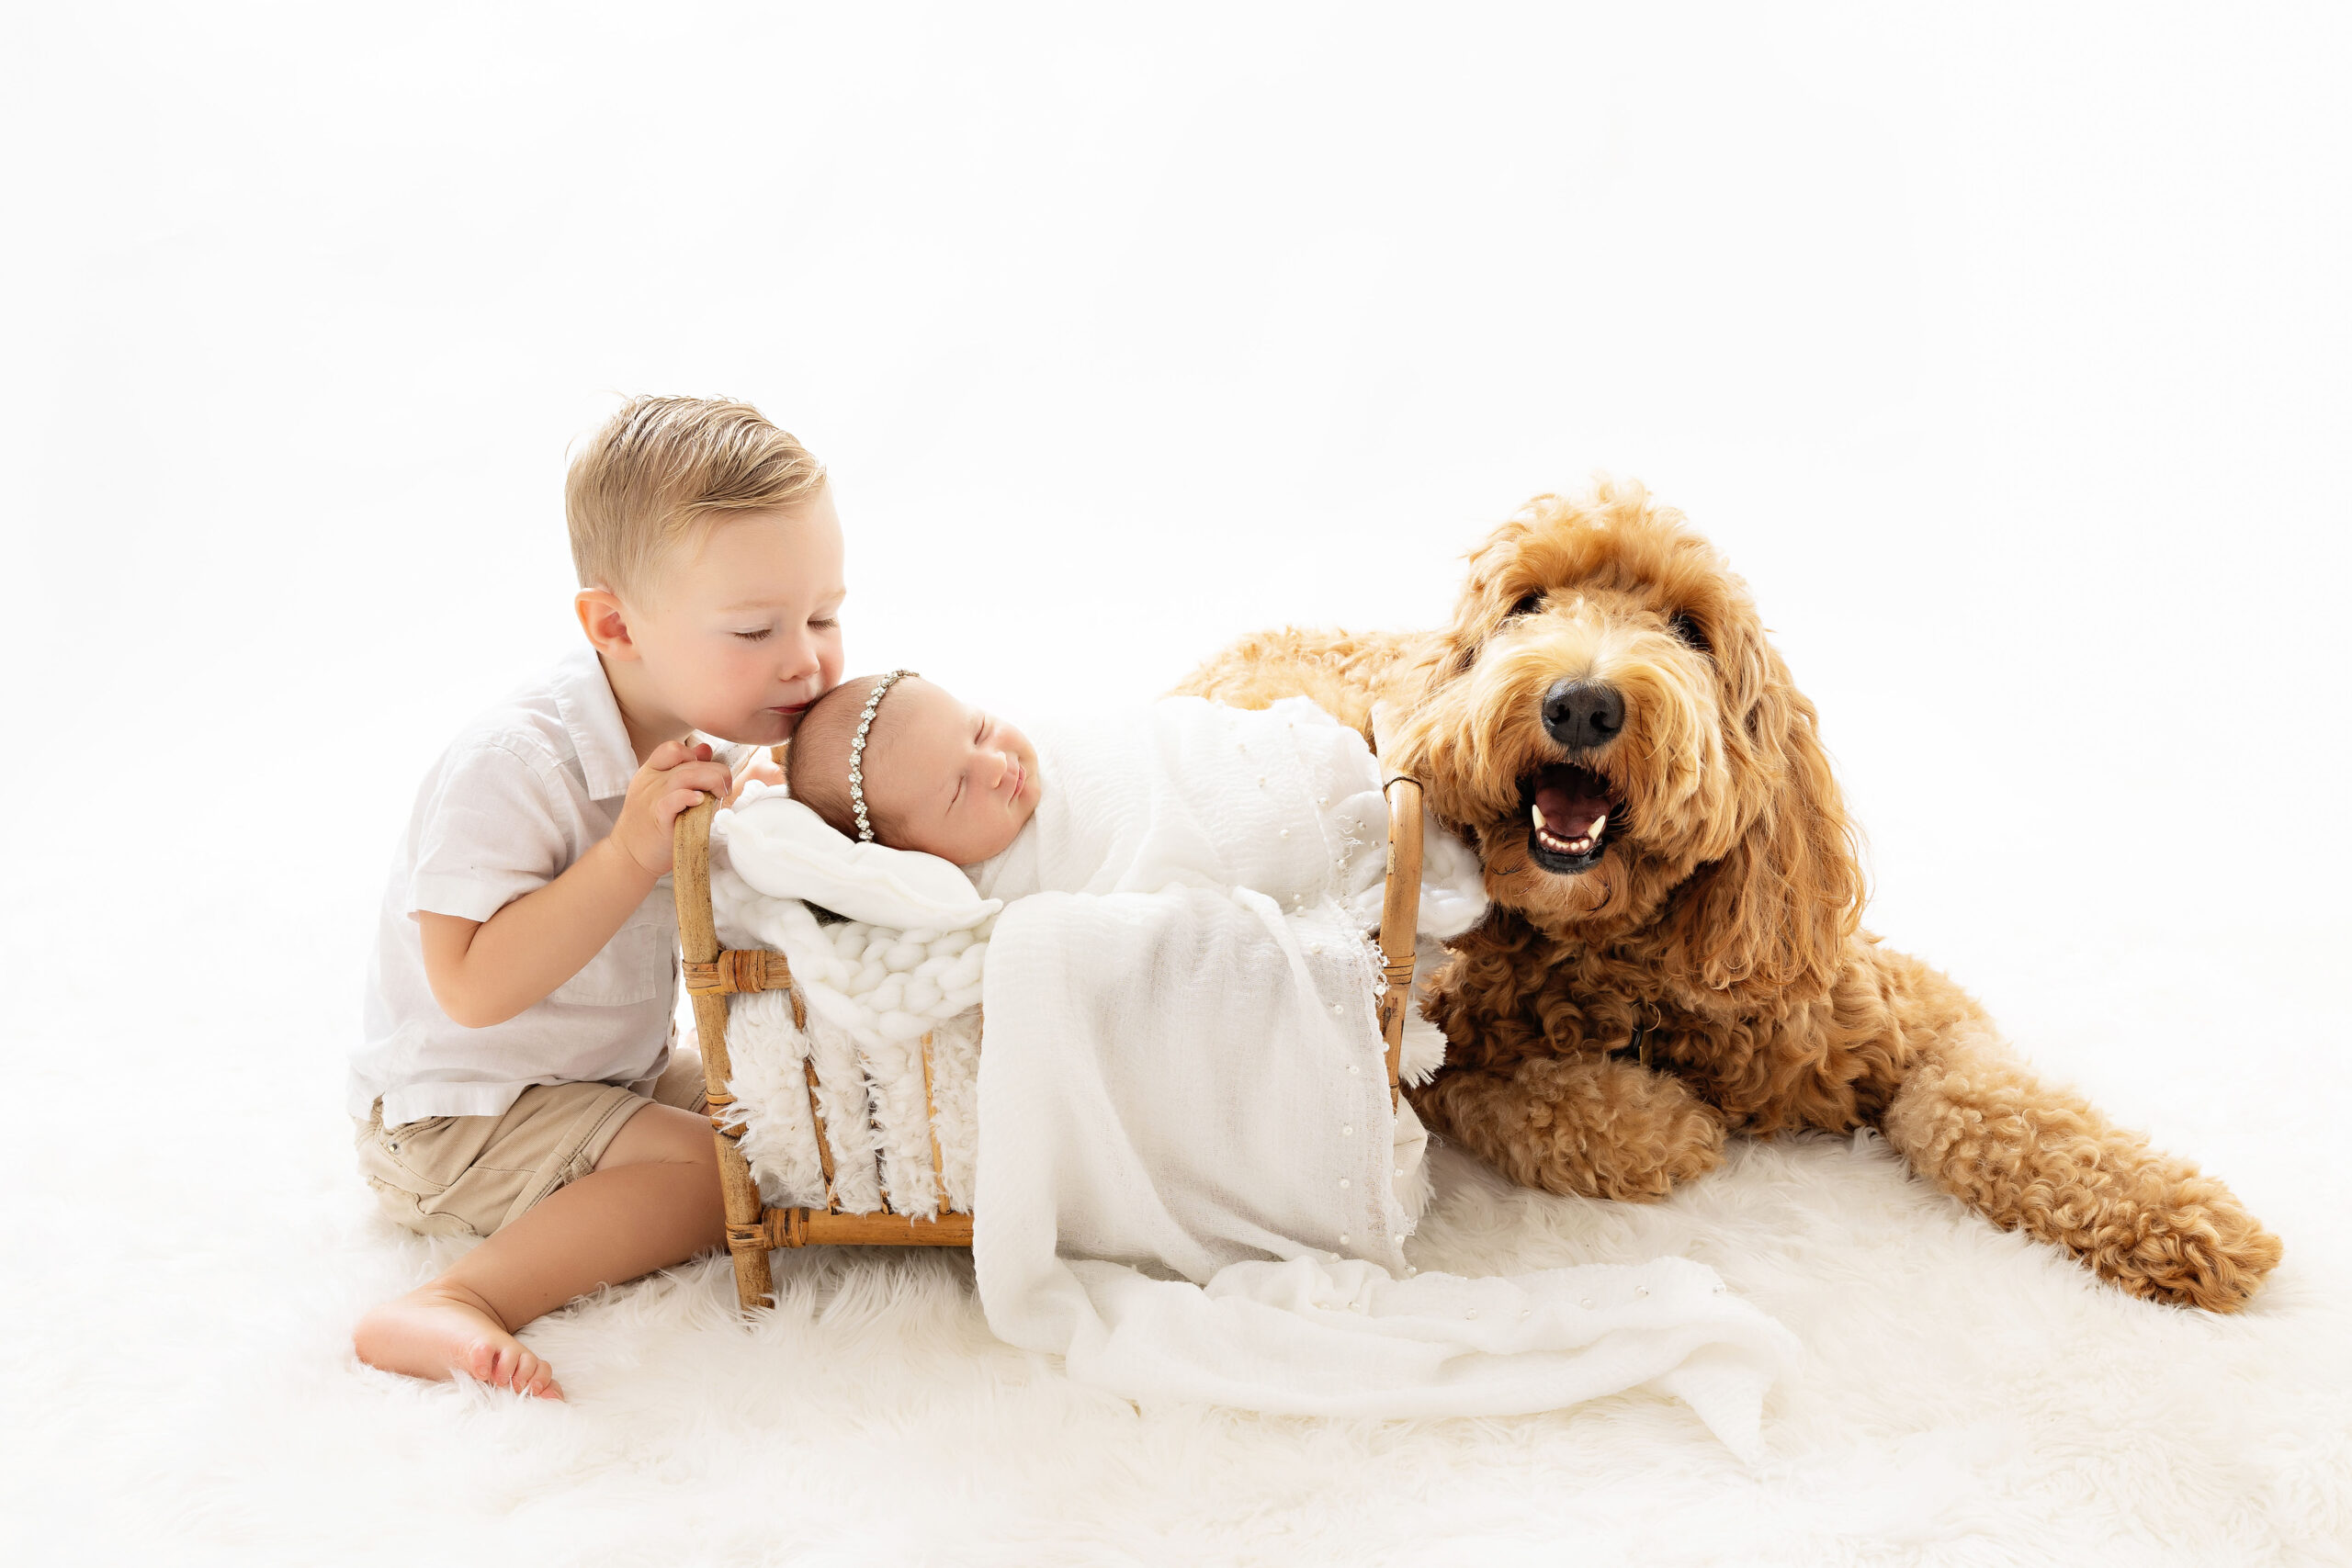 Newborn baby girl with big brother and their golden doodle on an all white background in a NJ photo studio.